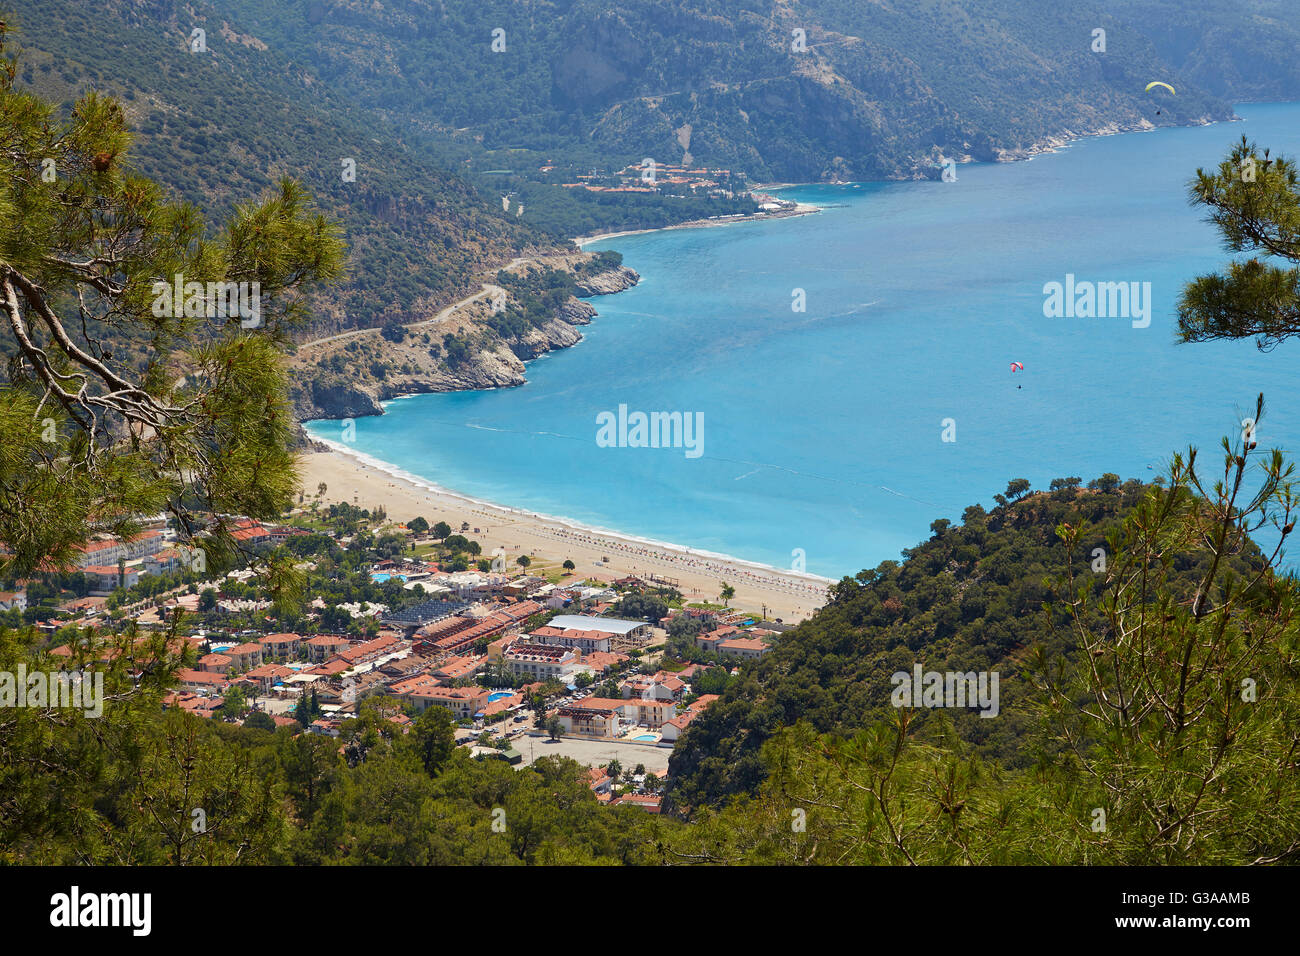 Elevated view of Oludeniz town and Belcekiz beach from the surrounding mountainside in Turkey. Stock Photo